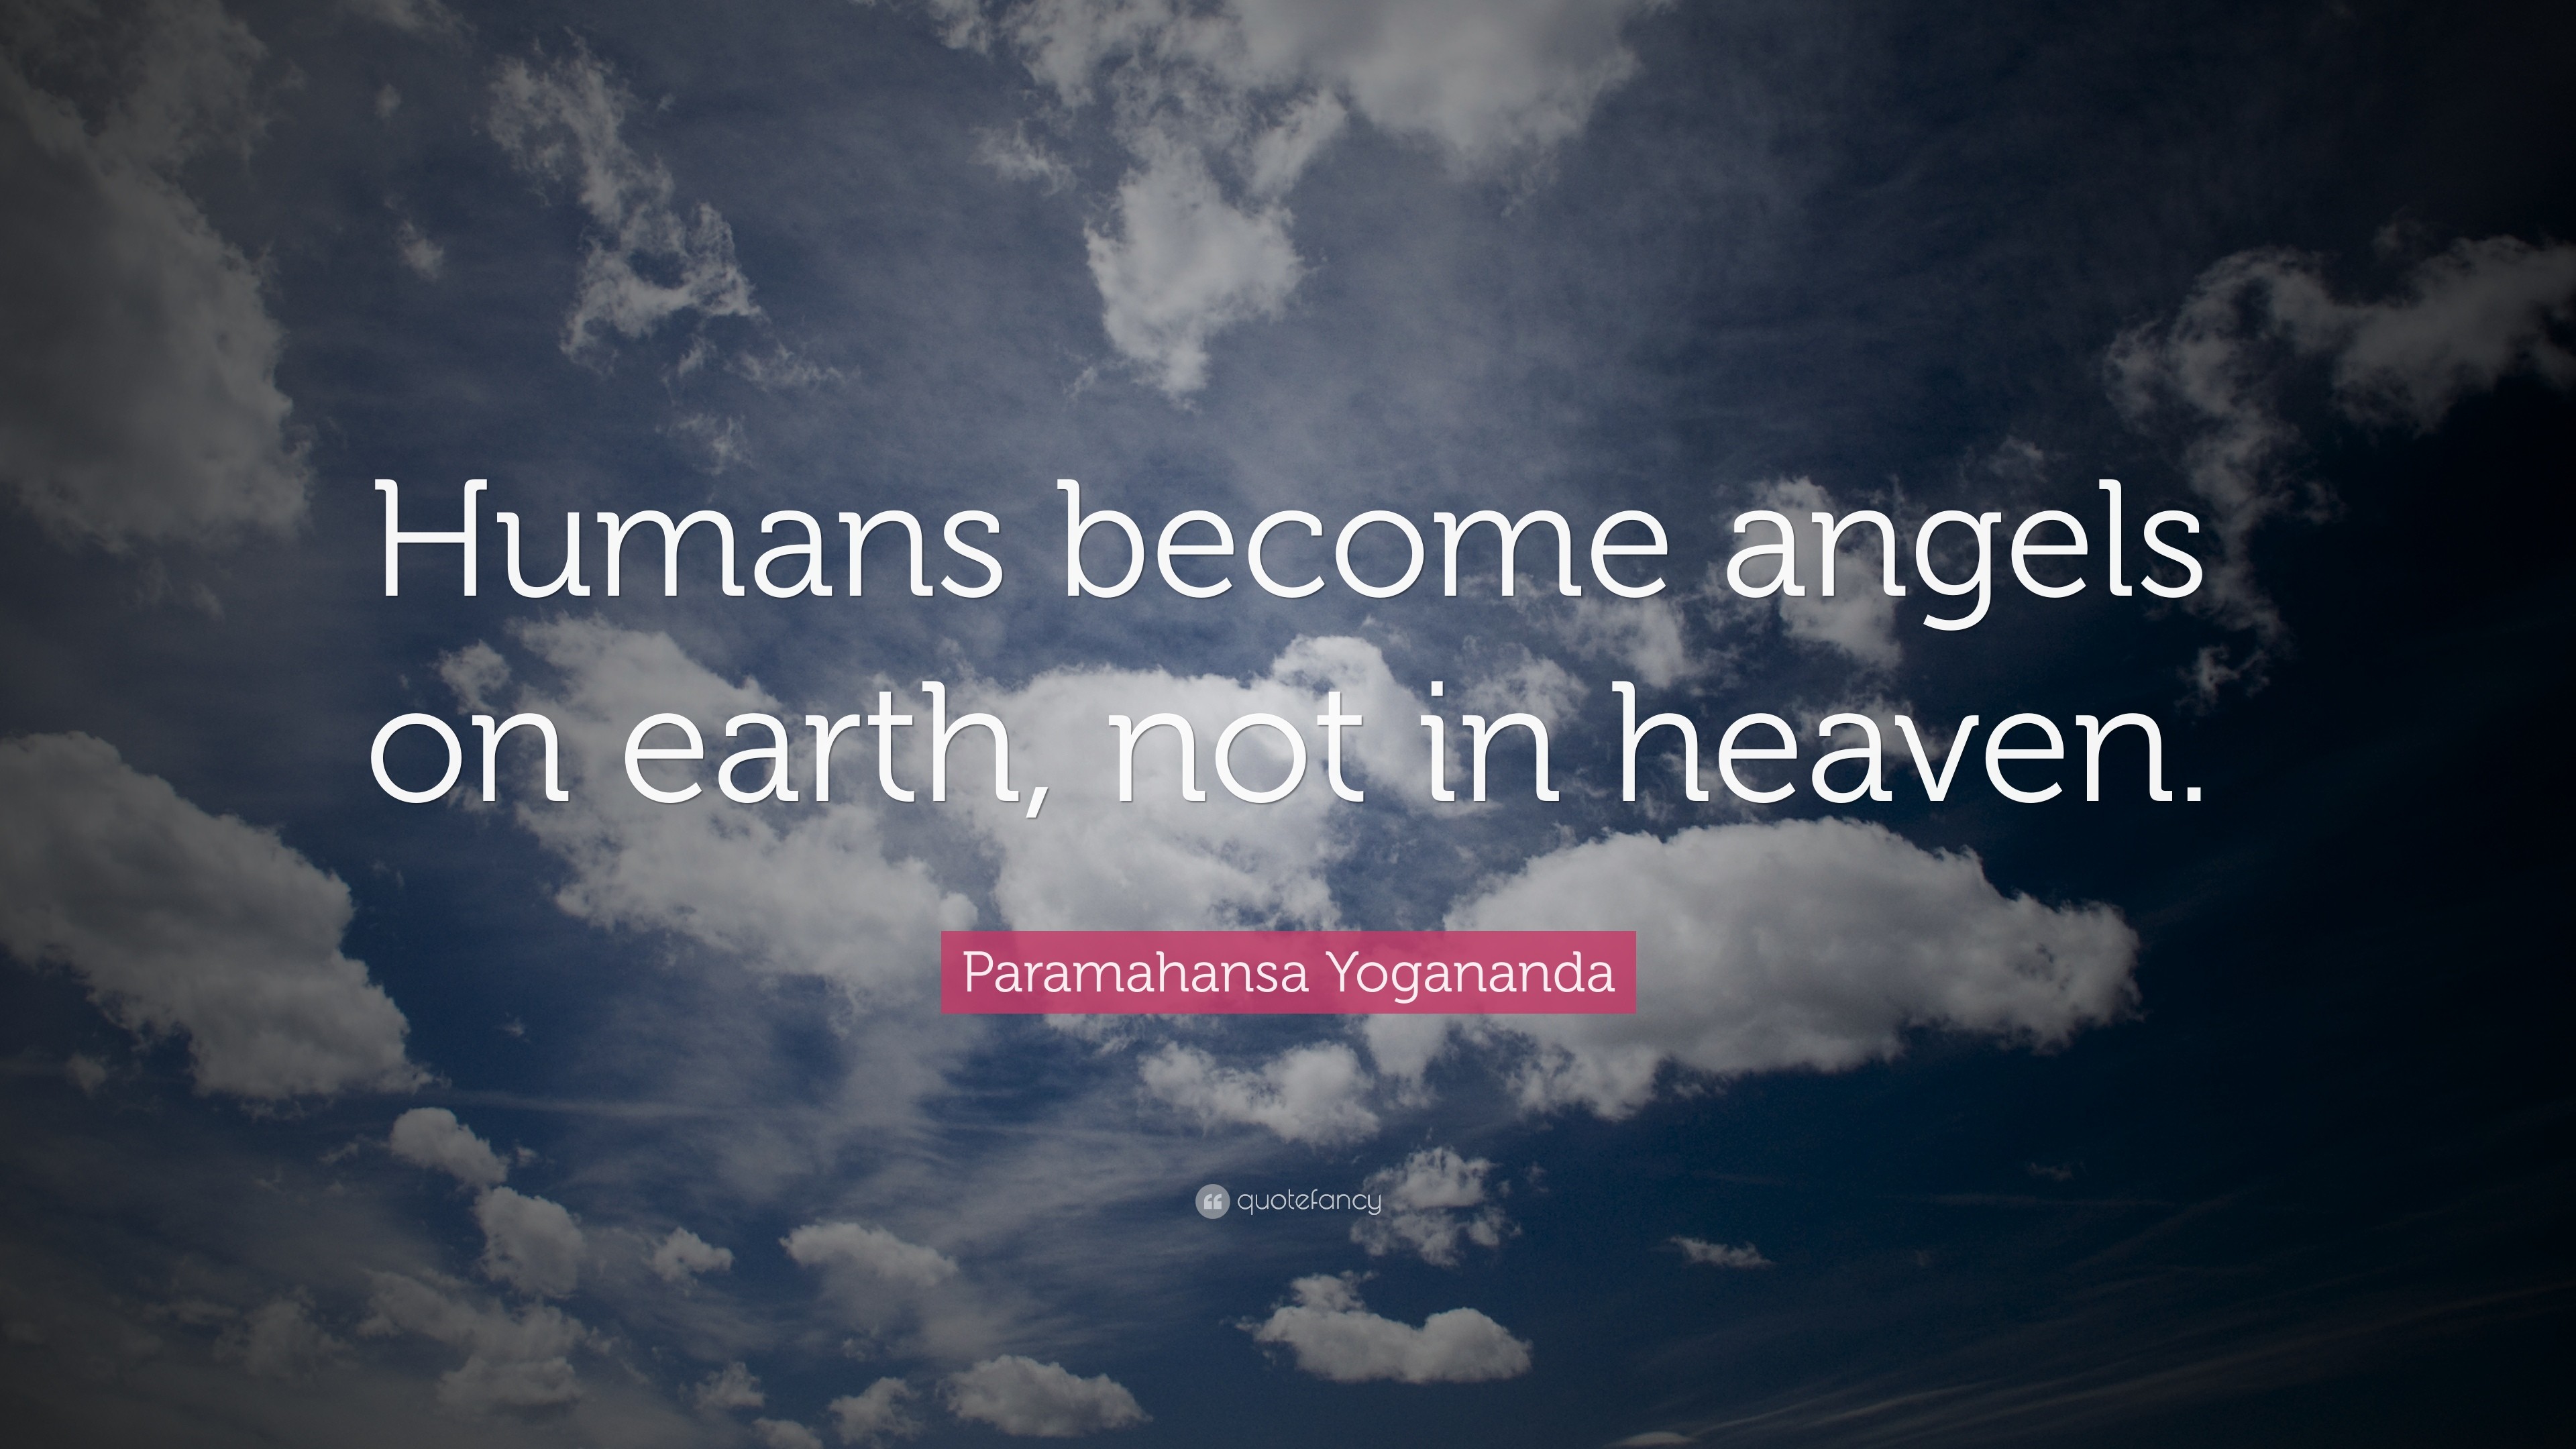 3840x2160 Paramahansa Yogananda Quote: “Humans become angels on earth, not in heaven.”